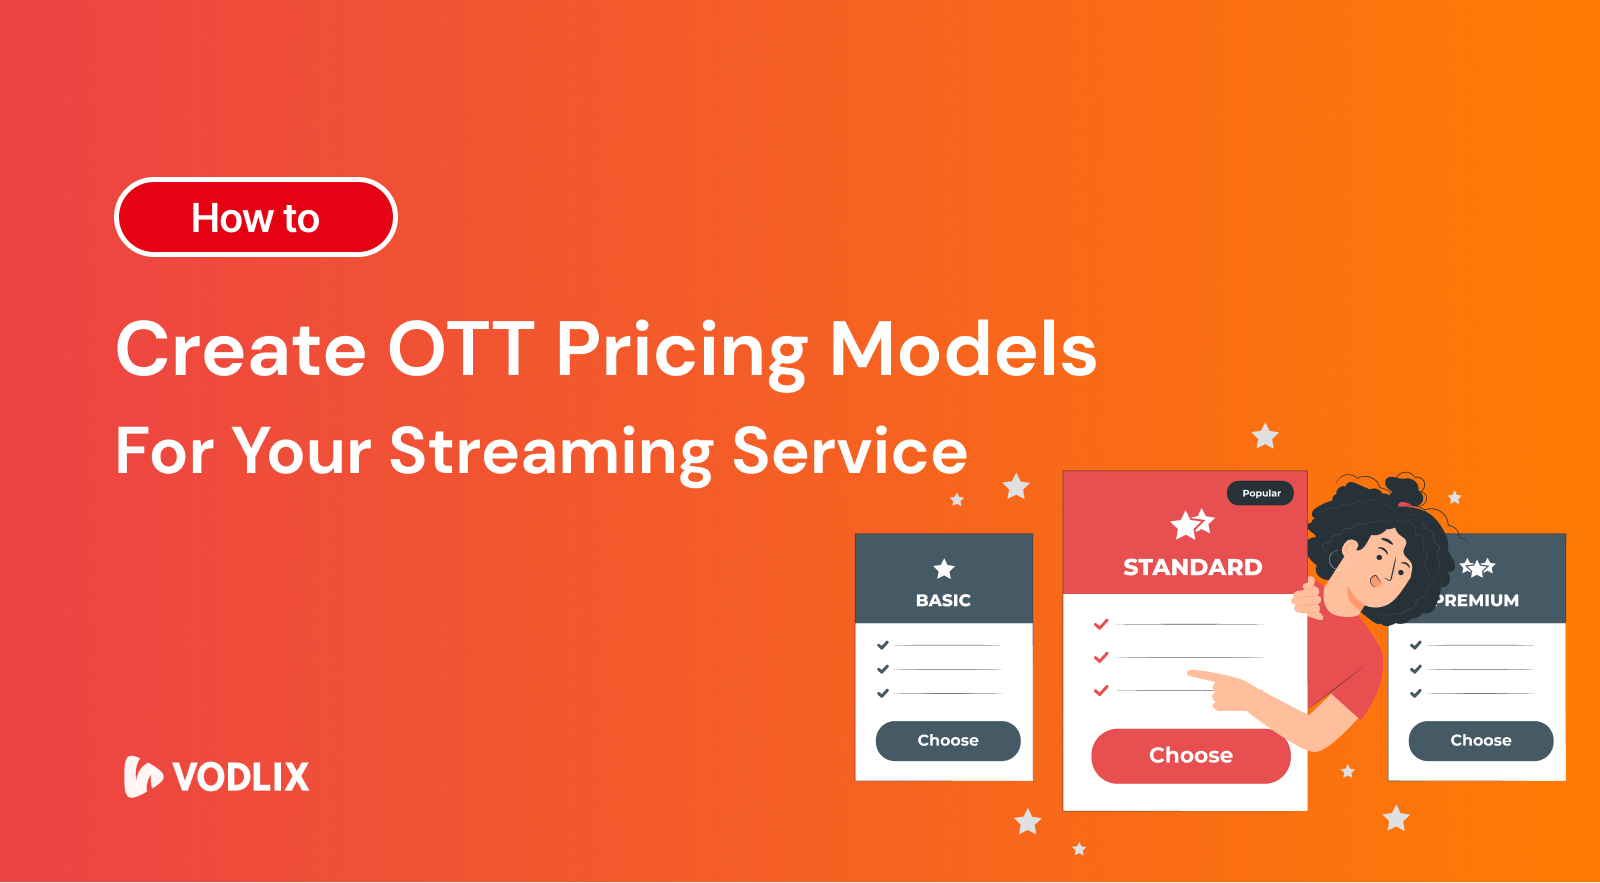 How to Create OTT Pricing Models for Your Streaming Service